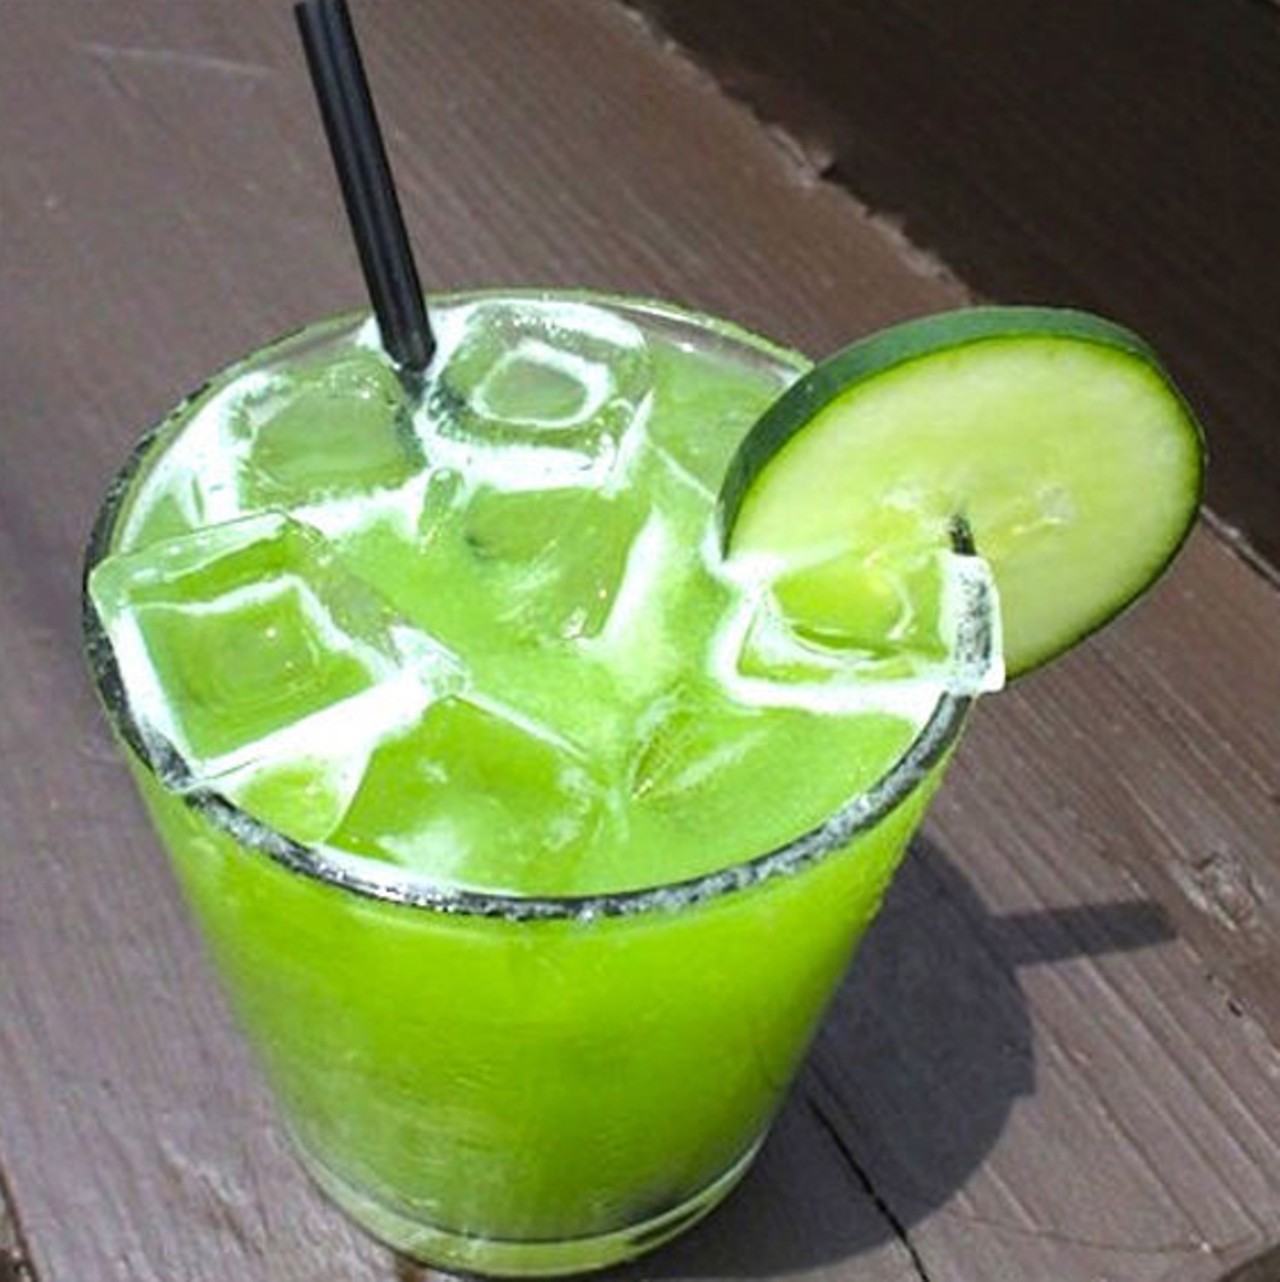 The Royale's "Subcontinental" is comprised of gin and Cointreau with fresh lime and cucumber juices.